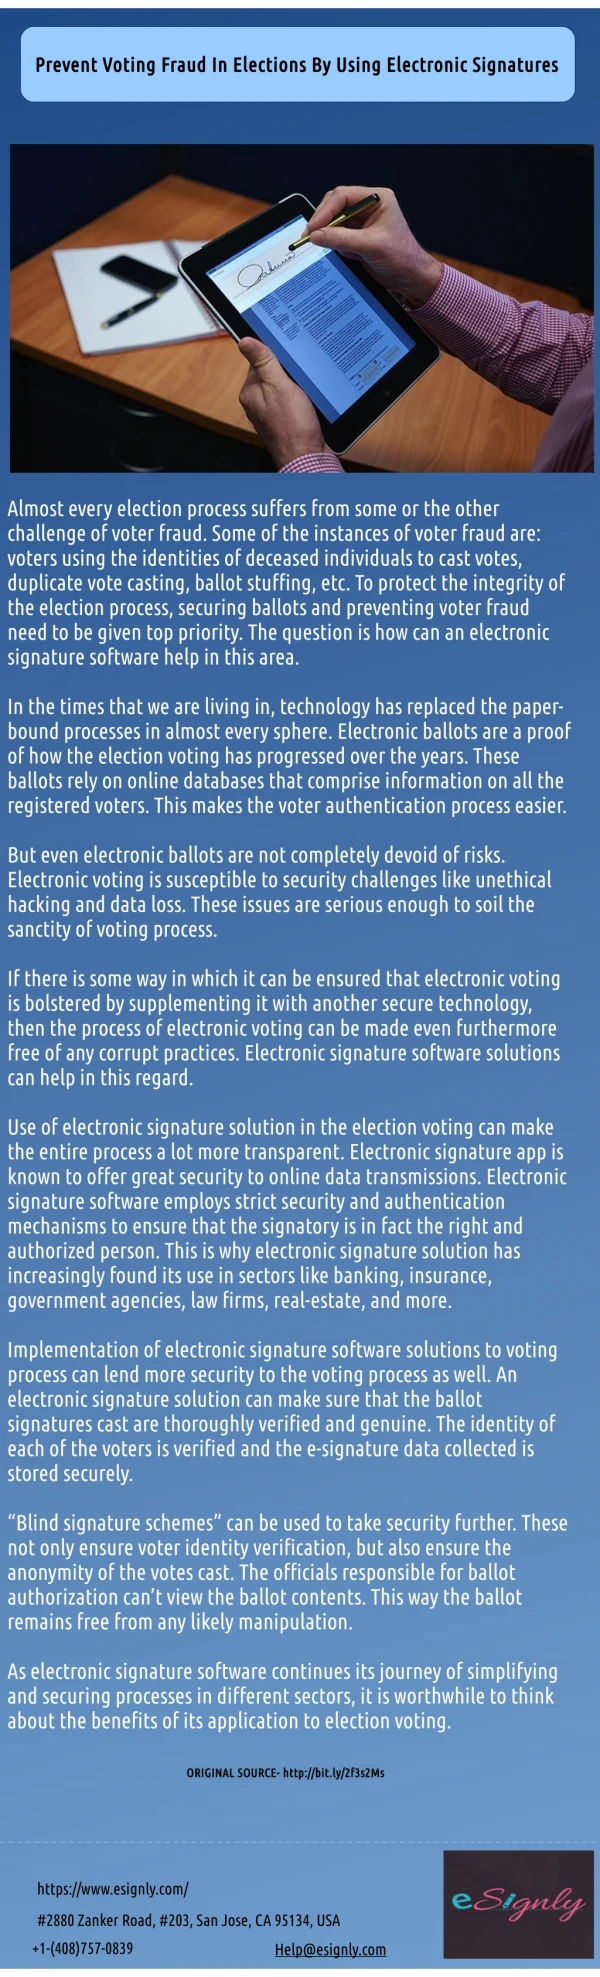 Prevent the Voter Fraud by Using Electronic Signatures